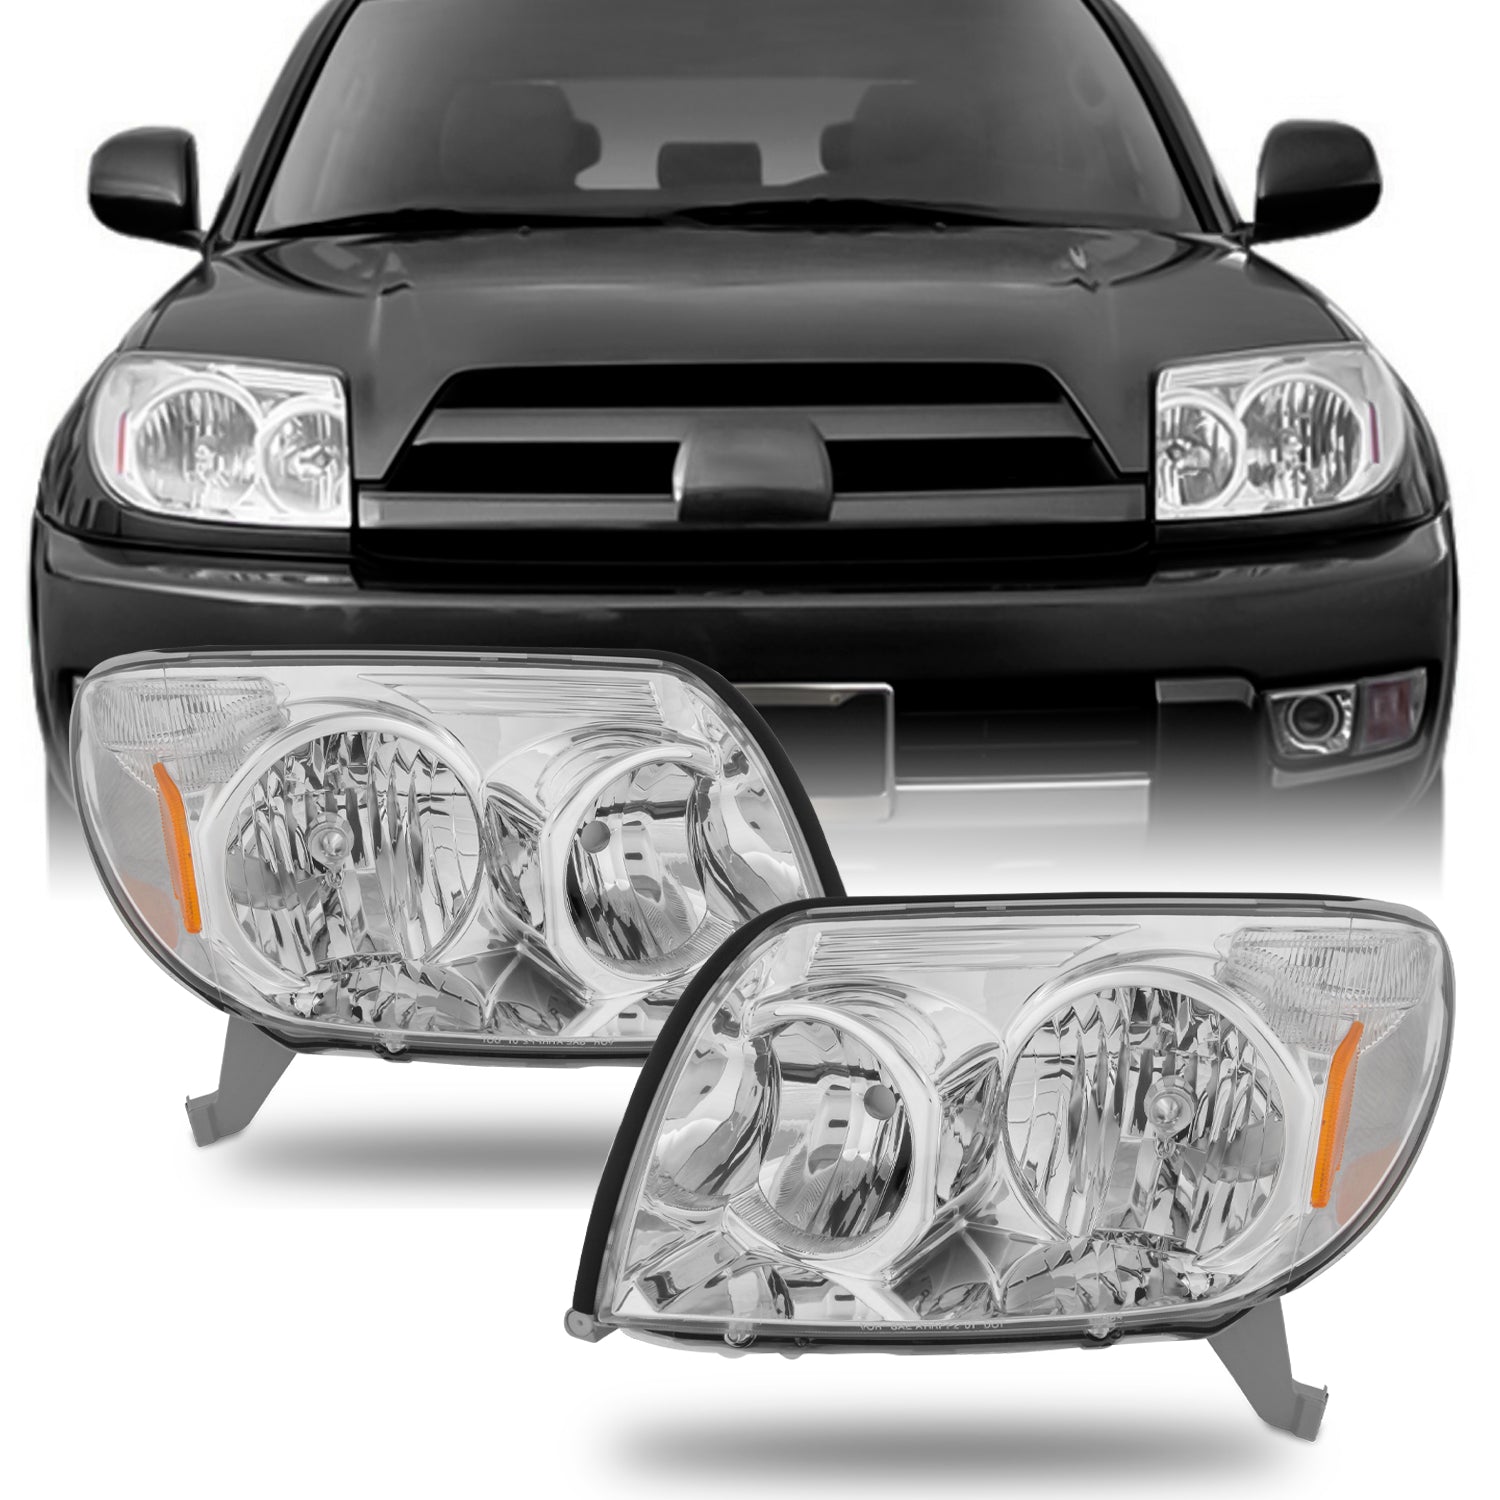 AKKON - For Toyota 4Runner Sport SUV [OE Style] Replacement Headlights